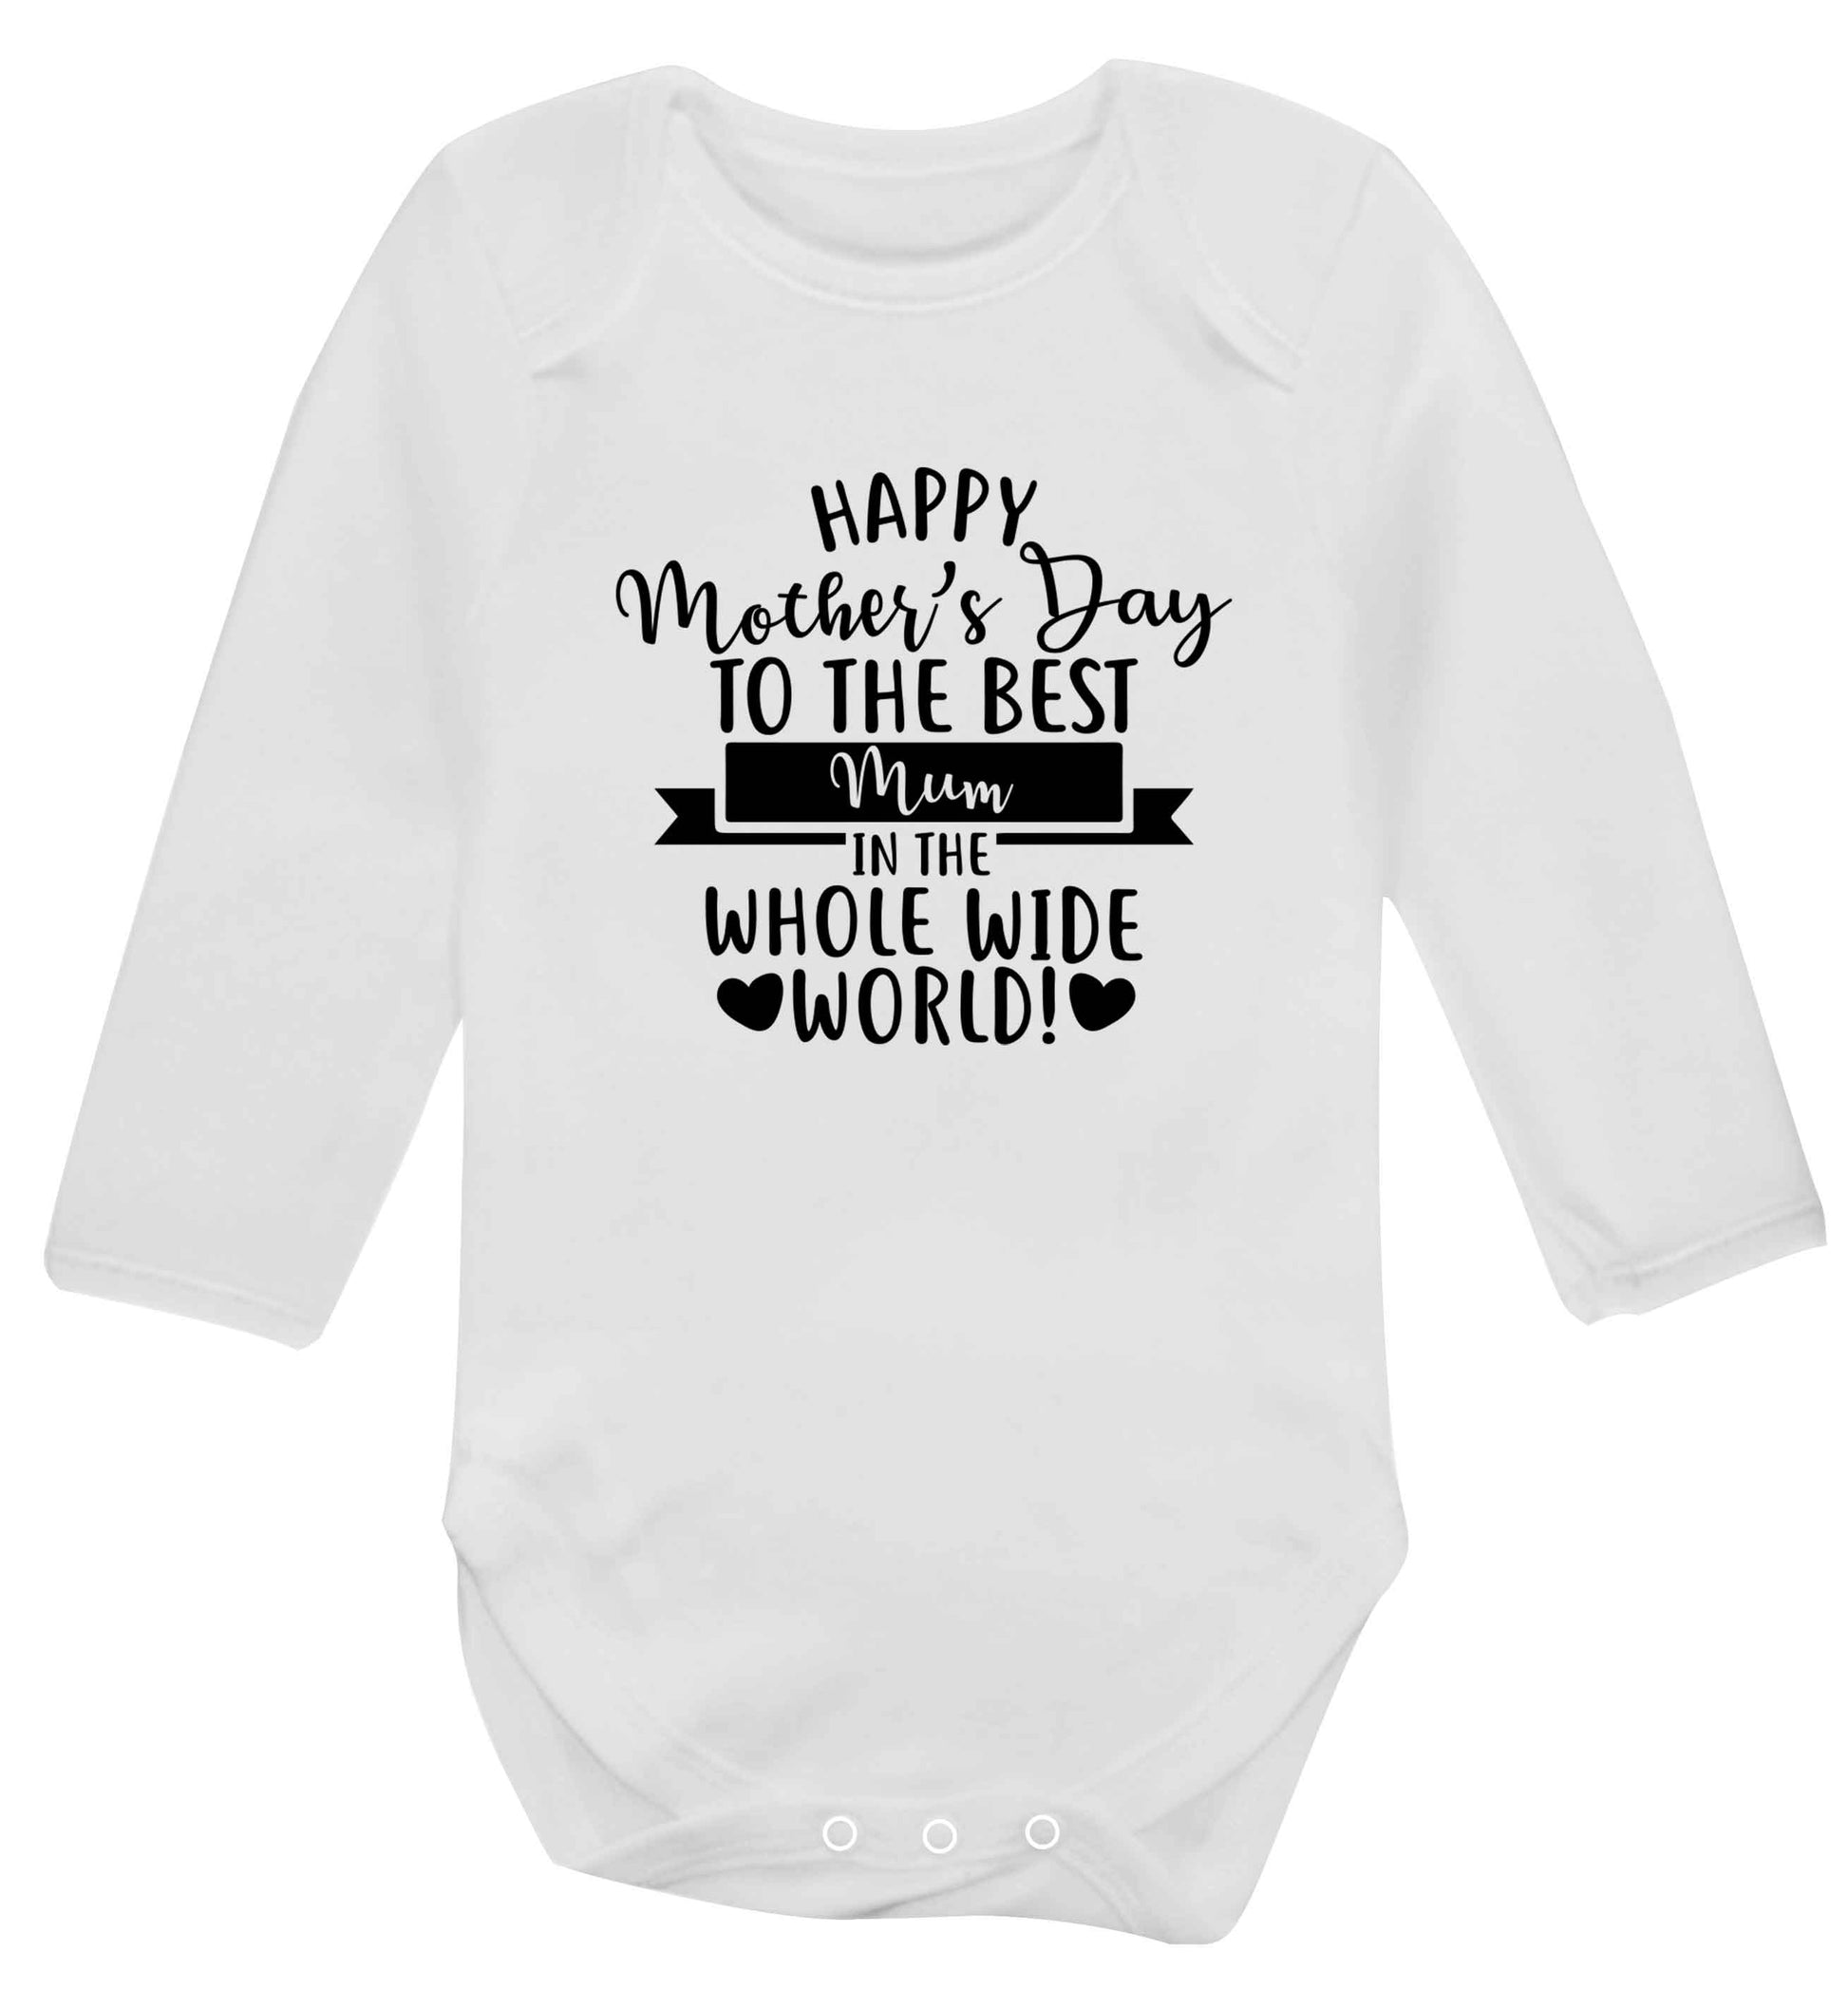 Happy mother's day to the best mum in the world baby vest long sleeved white 6-12 months